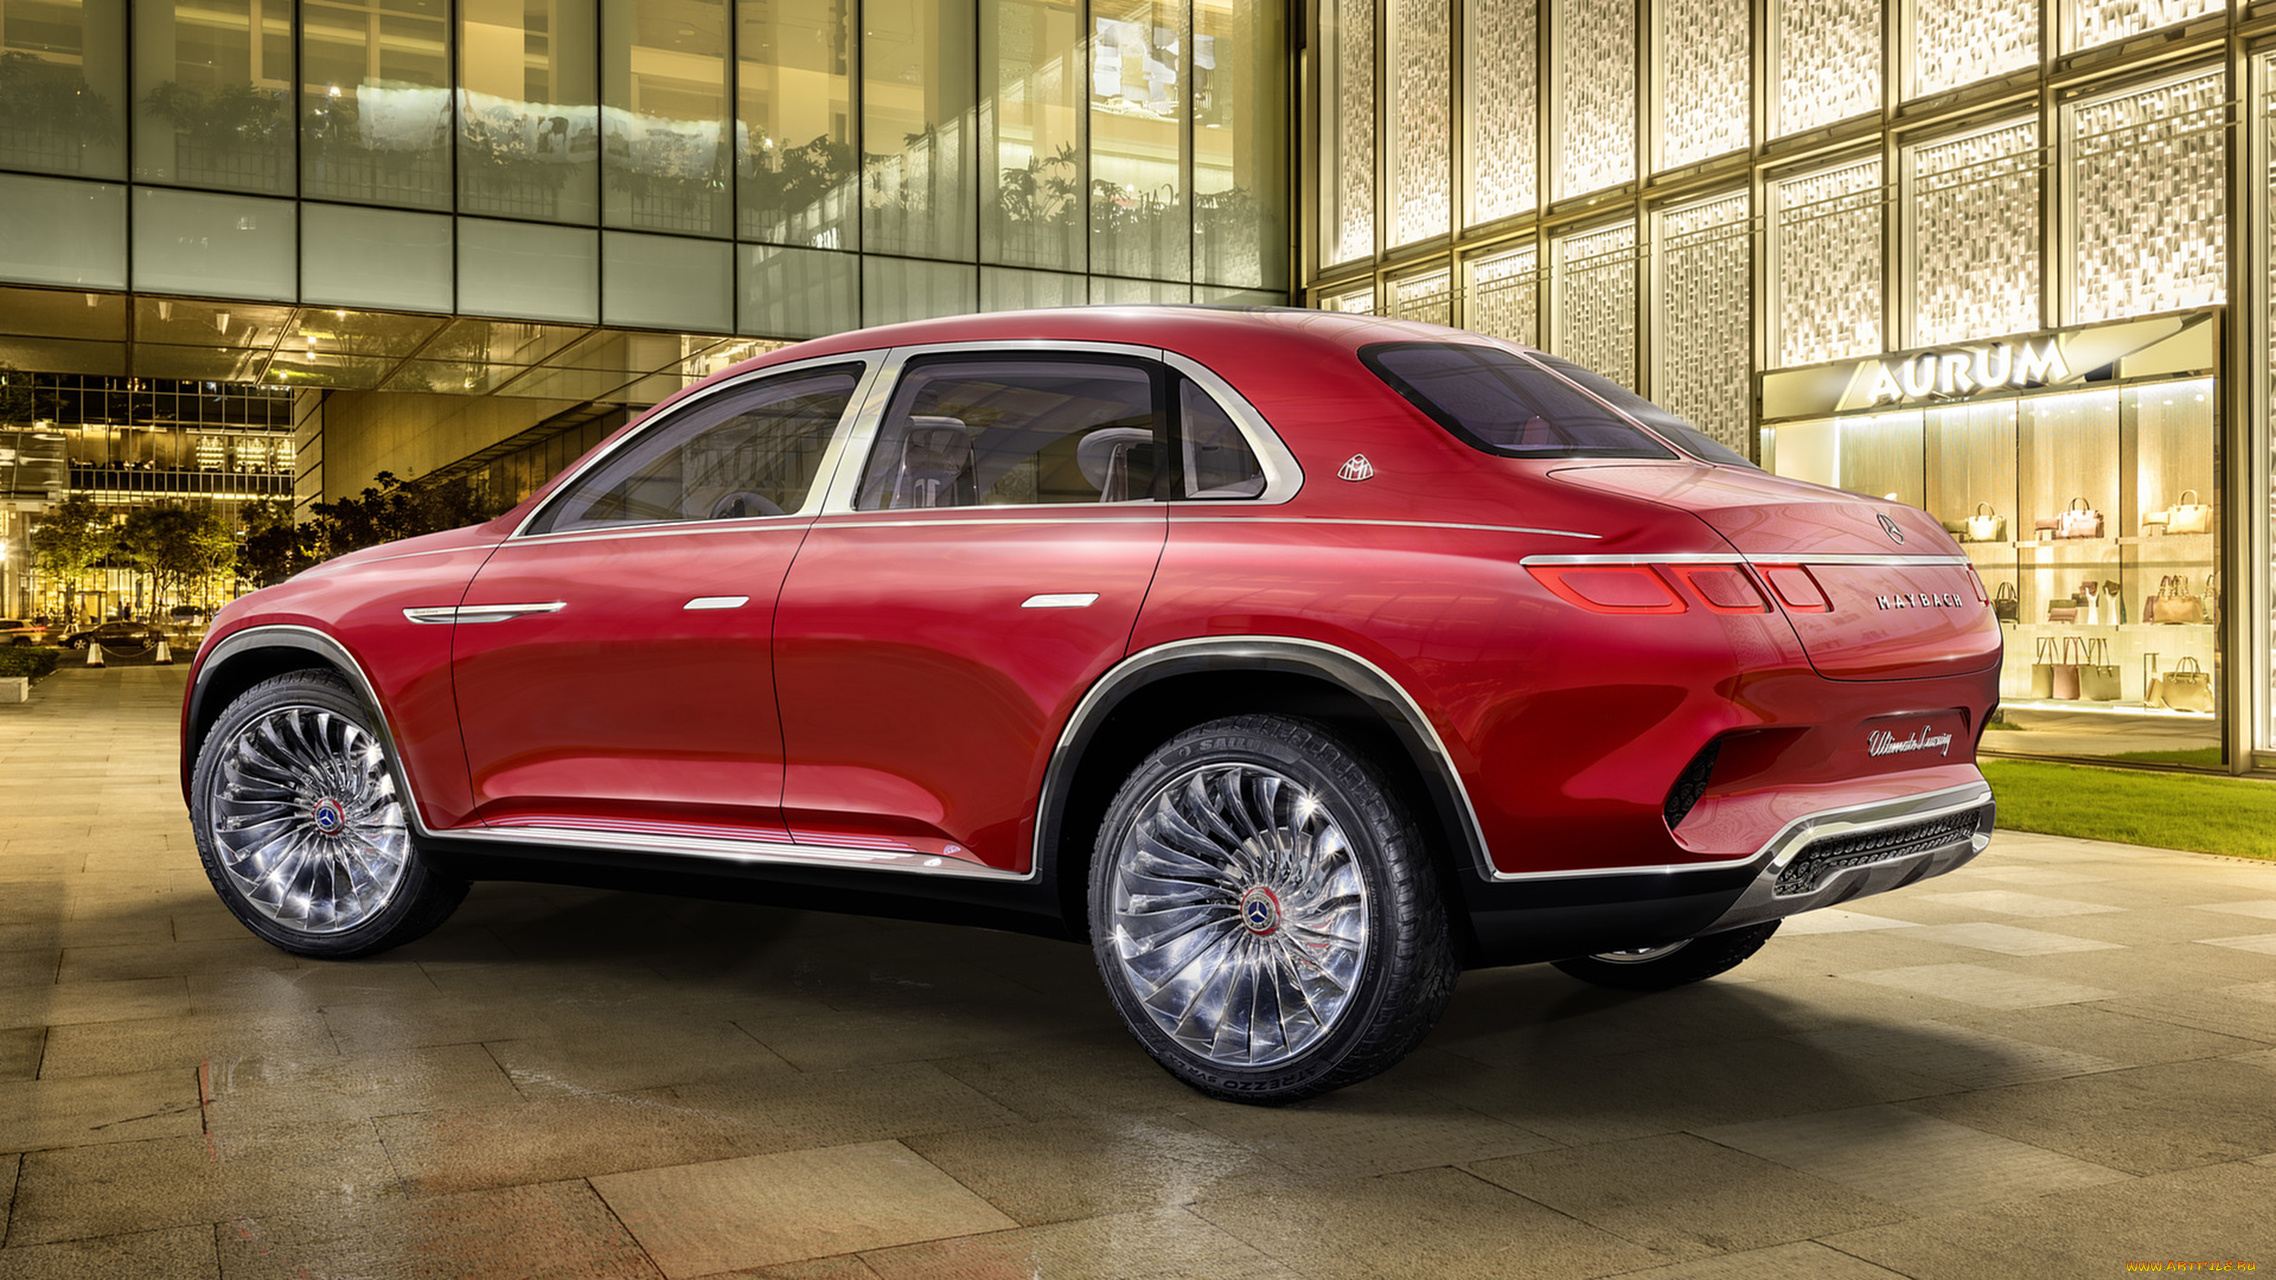 mercedes-maybach, vision, ultimate, luxury, suv, concept, 2018, автомобили, mercedes-benz, concept, suv, luxury, ultimate, mercedes-maybach, vision, 2018